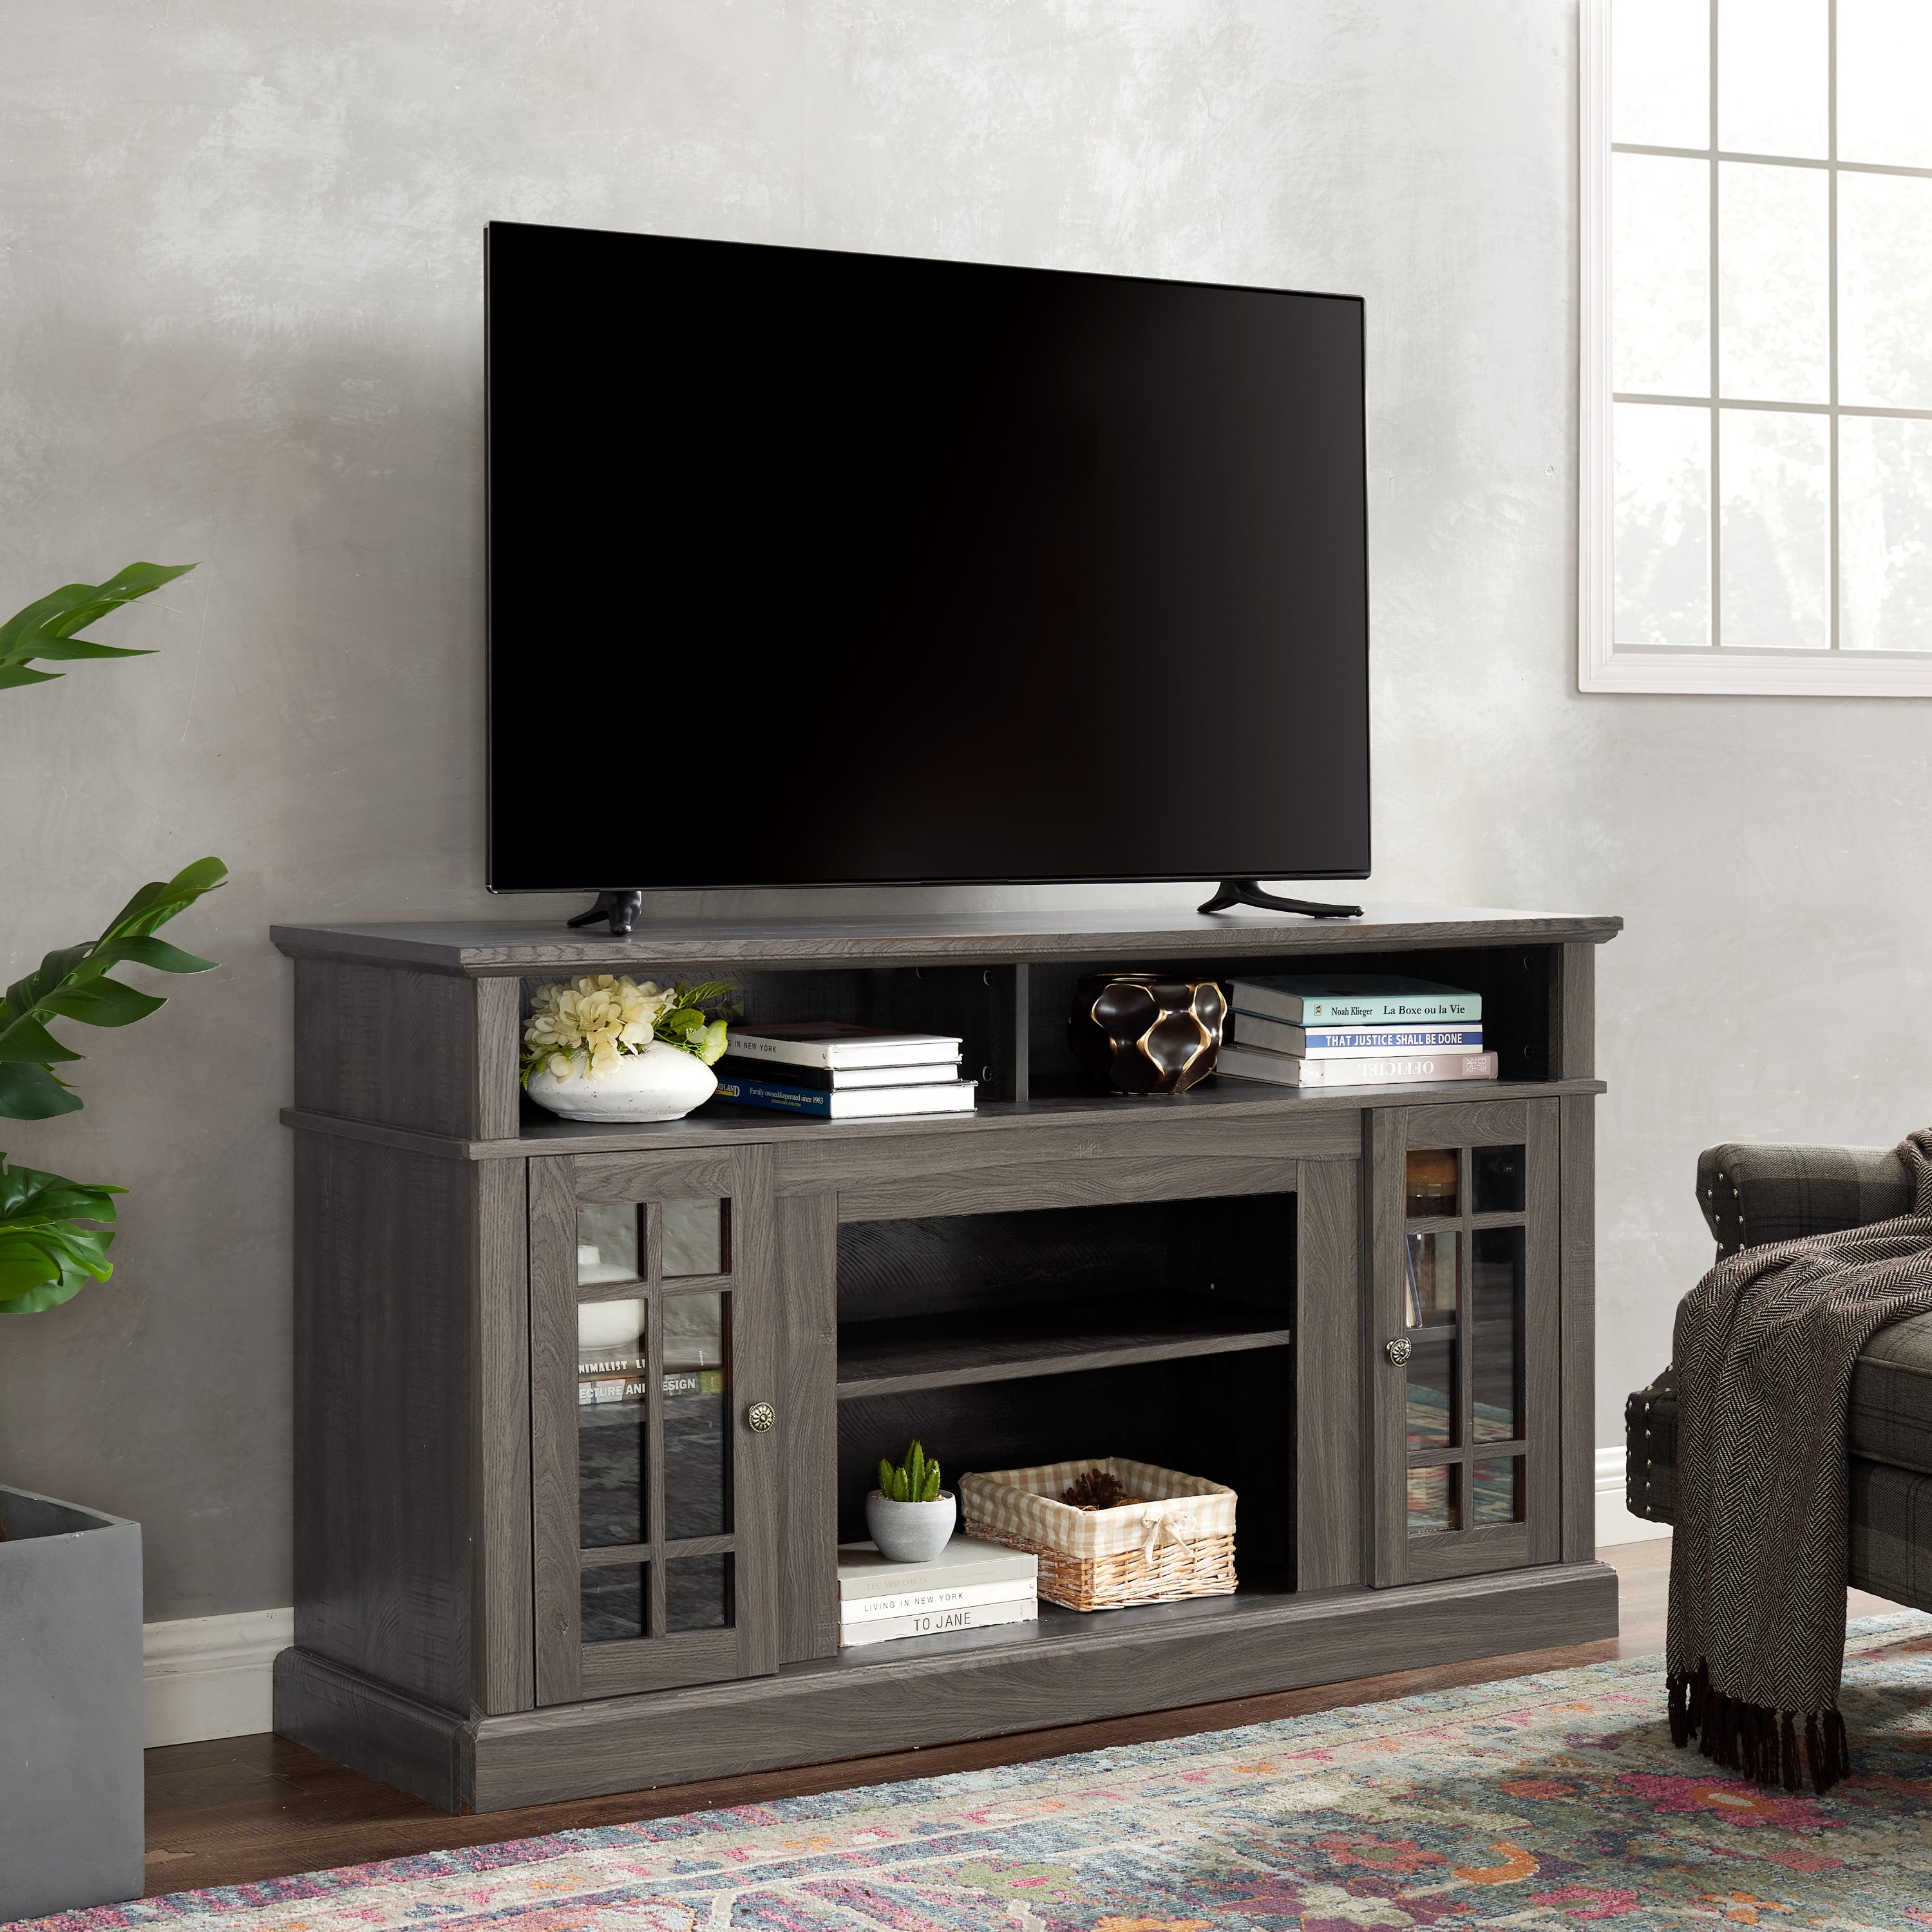 🆓🚛 Classic TV Media Stand Modern Entertainment Console for Tv Up To 65" With Open and Closed Storage Space, Dark Walnut/Black, 58.25"W*15.75"D*32"H